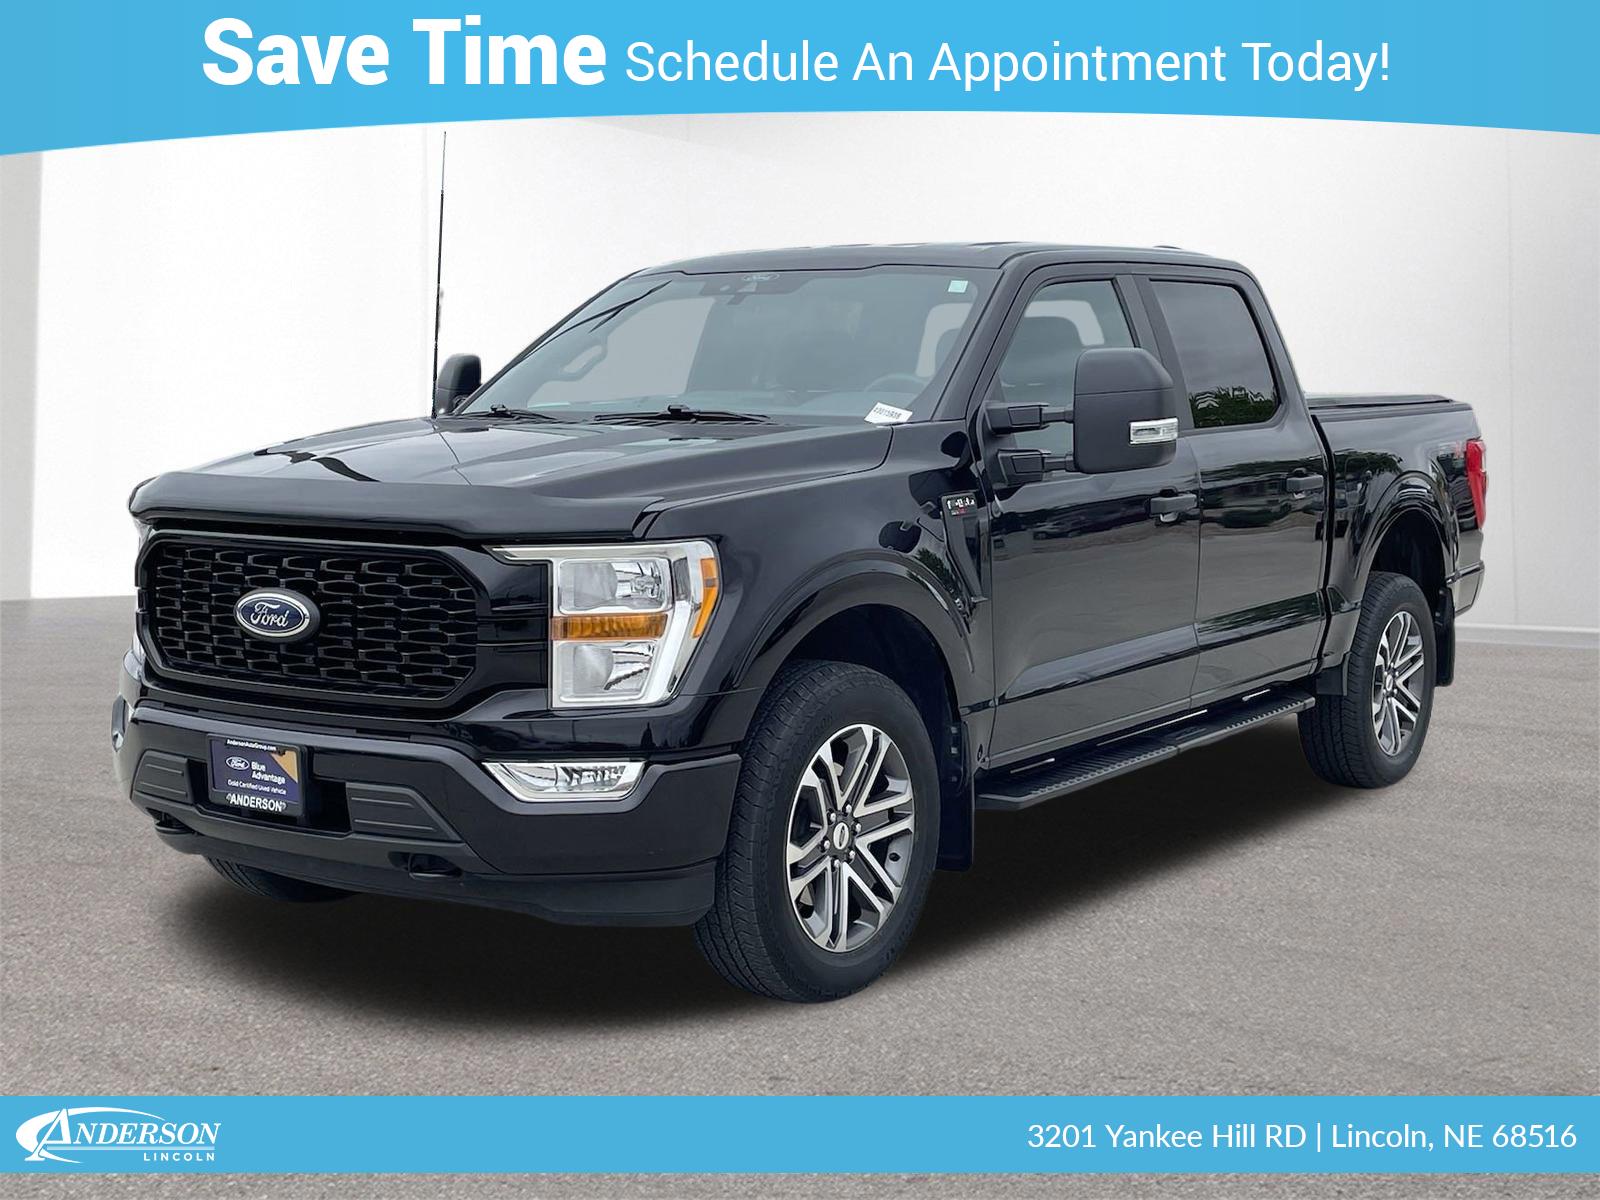 Used 2021 Ford F-150 XL Crew Cab Truck for sale in Lincoln NE